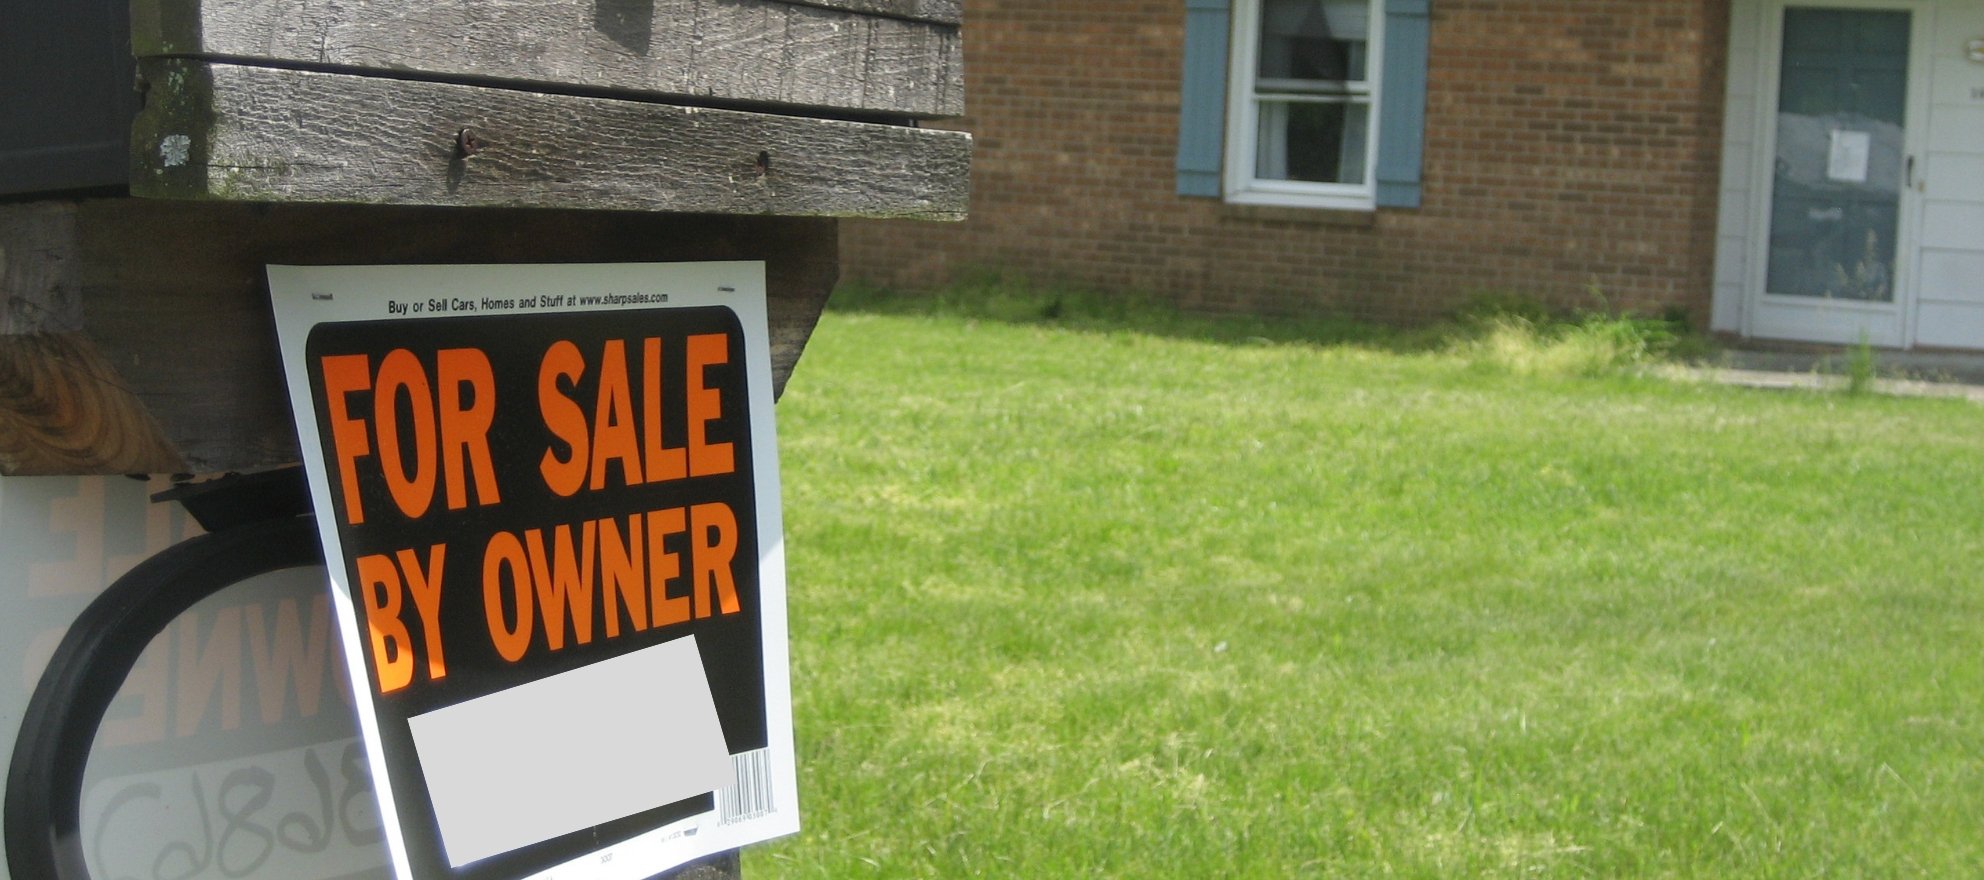 5 Tips That'll Help You Win Over Any FSBO - Inman